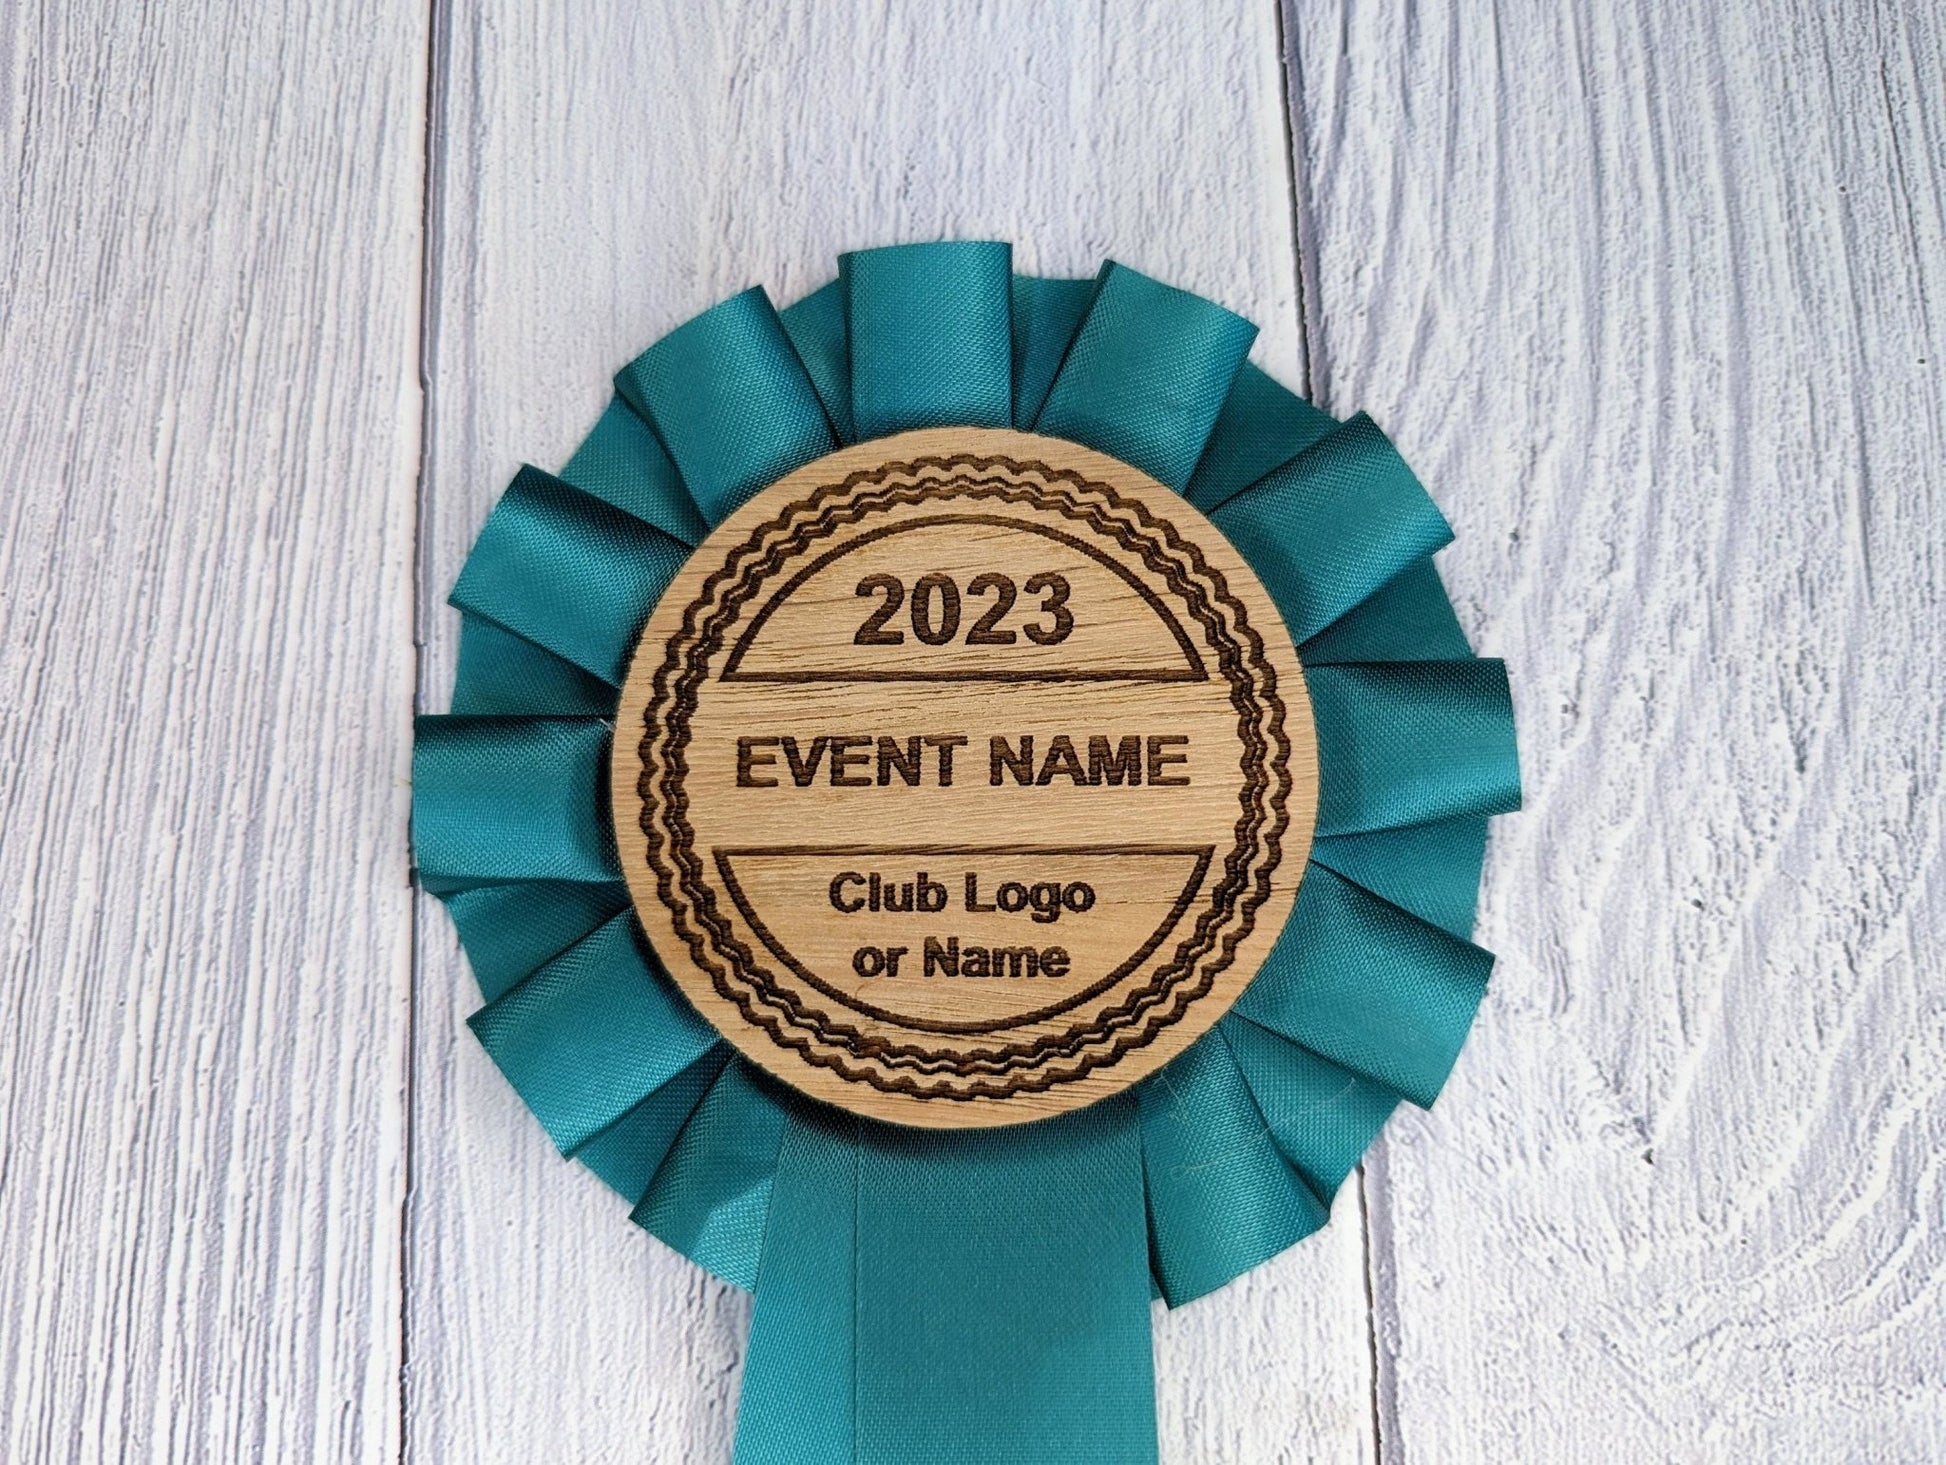 Personalised Wooden Rosette's | Free Design Service | Customised 90mm Rosette with 60mm Wooden Centre | Award Ribbon | Dog & Horse Shows - CherryGroveCraft